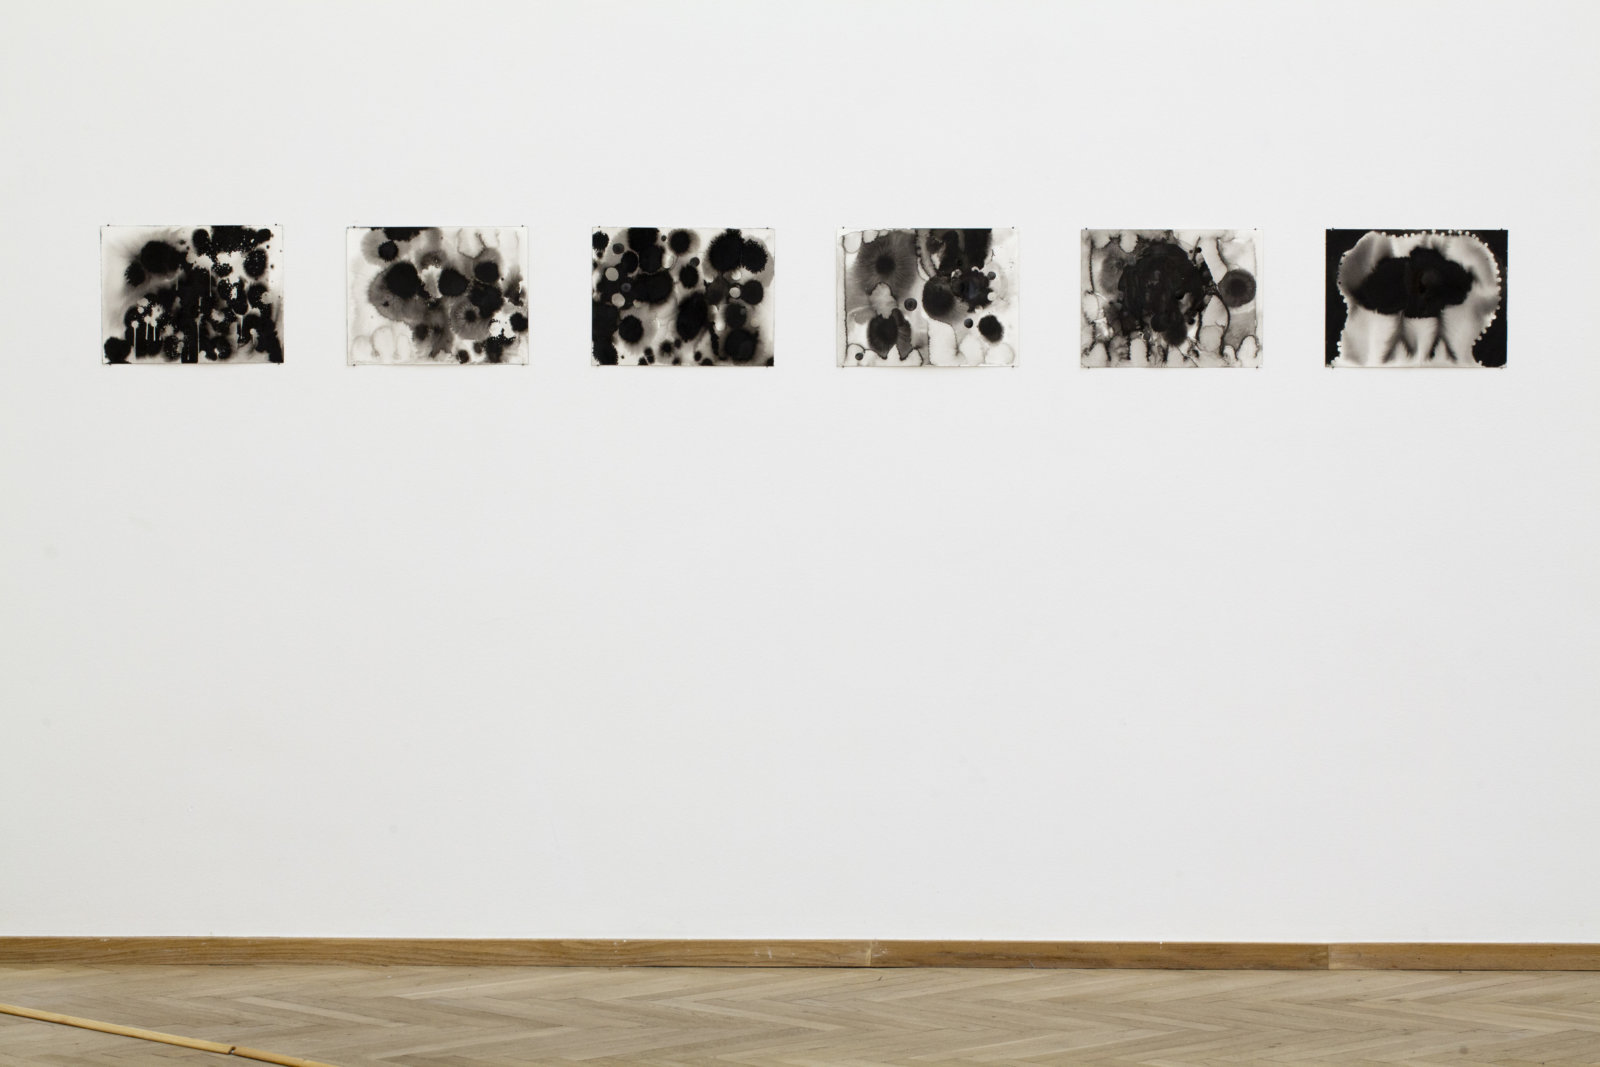 Christina Mackie, Studies for Explosions, 2011, indian ink on paper, dimensions variable